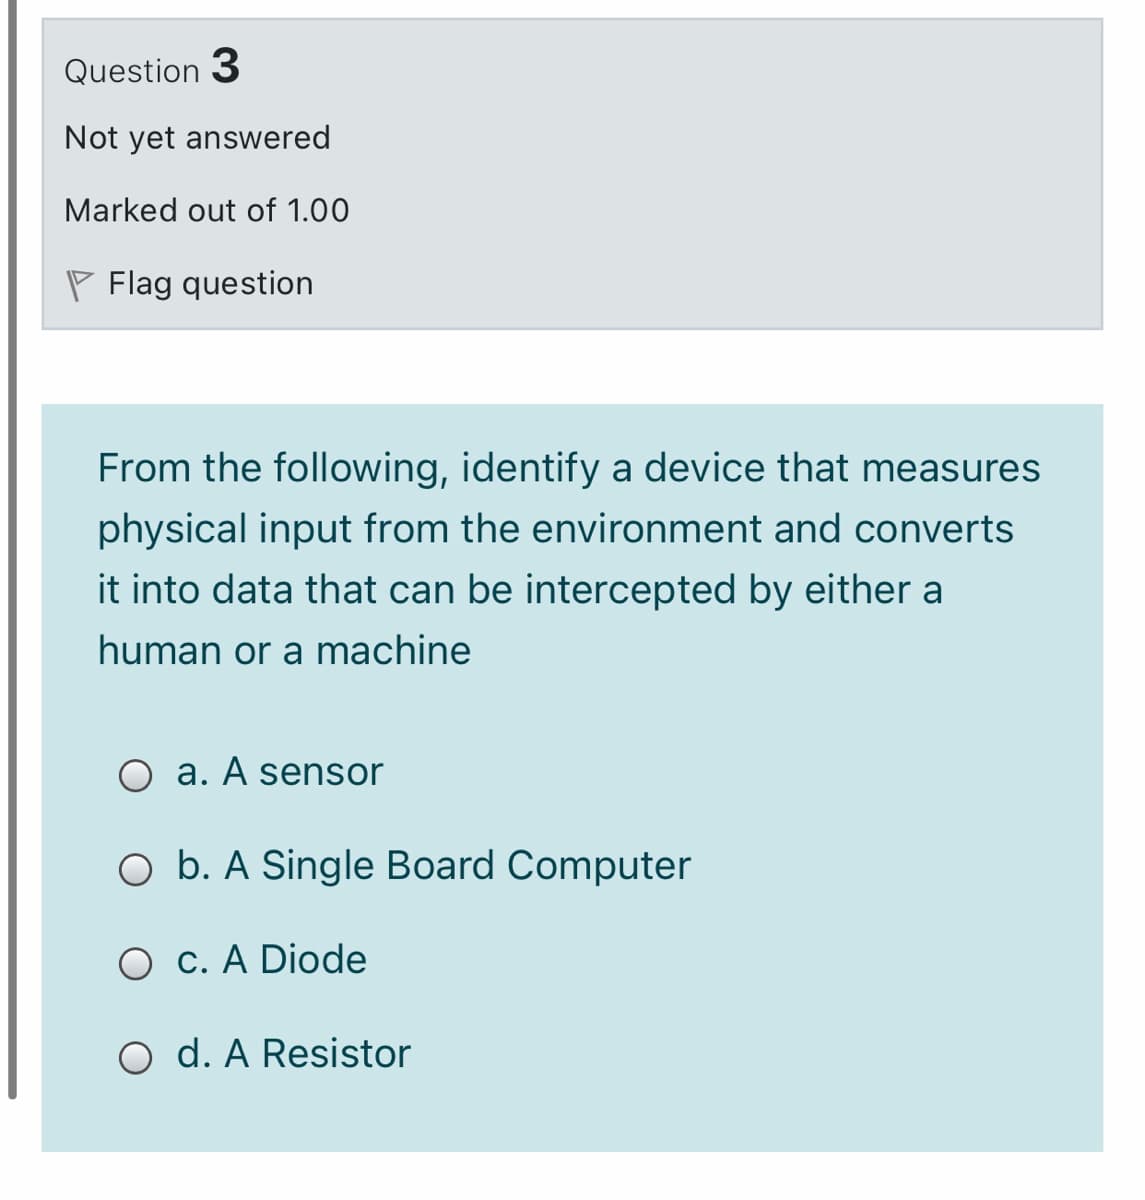 Question 3
Not yet answered
Marked out of 1.00
P Flag question
From the following, identify a device that measures
physical input from the environment and converts
it into data that can be intercepted by either a
human or a machine
O a. A sensor
O b. A Single Board Computer
O c. A Diode
O d. A Resistor
